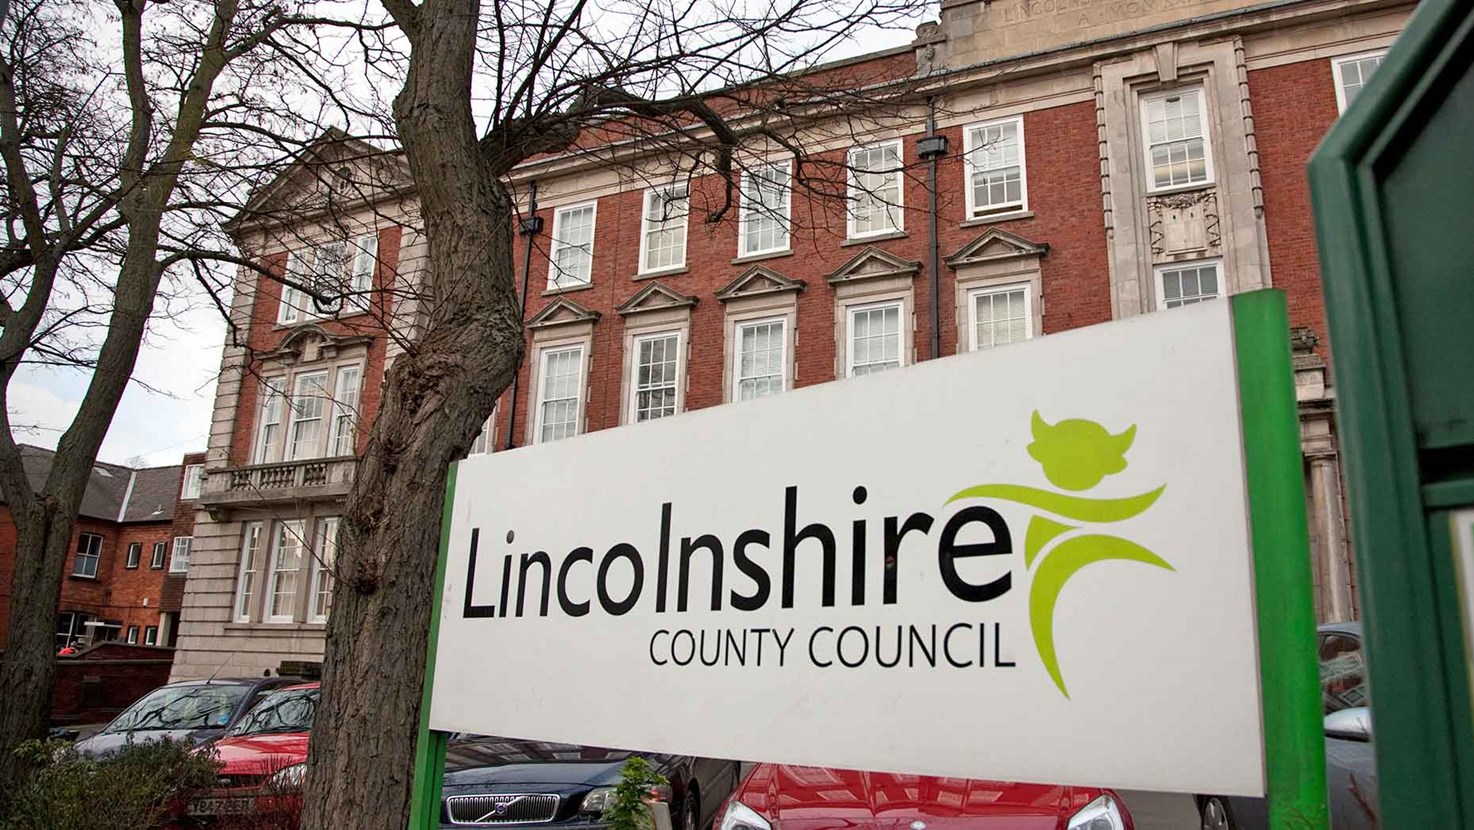 View all of the events and meetings that DPCC Phil Clark attended or hosted at Lincolnshire County Council in 2022